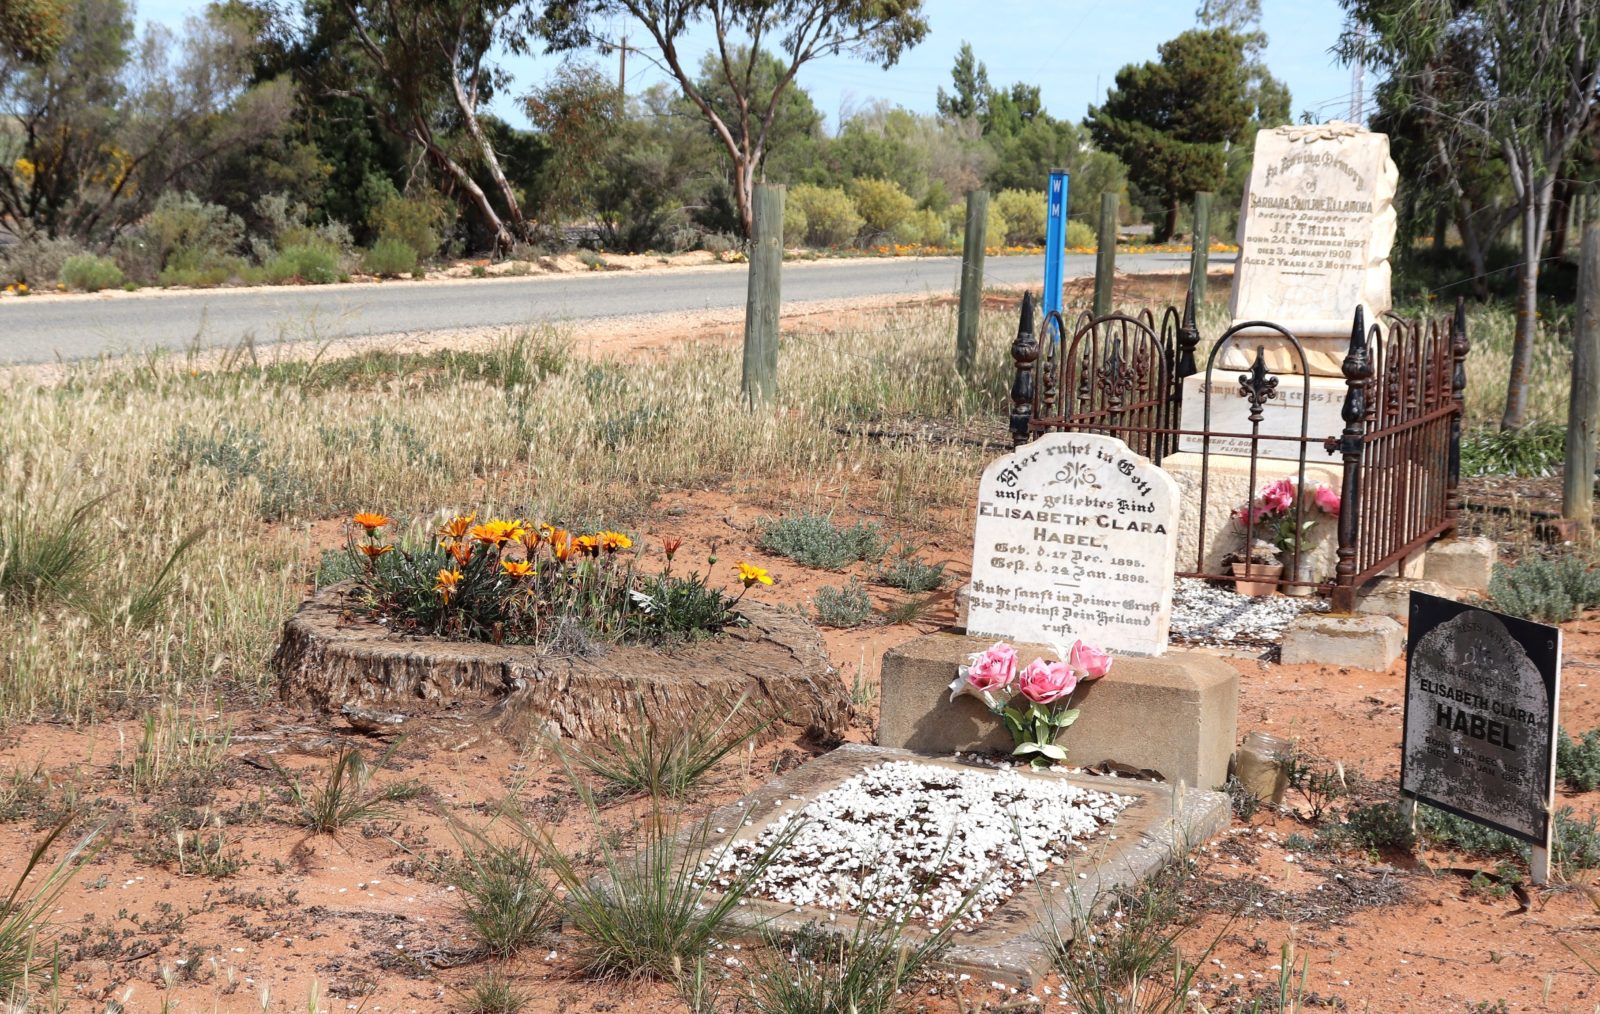 The two historic gravestones marking the resting place of two local children.